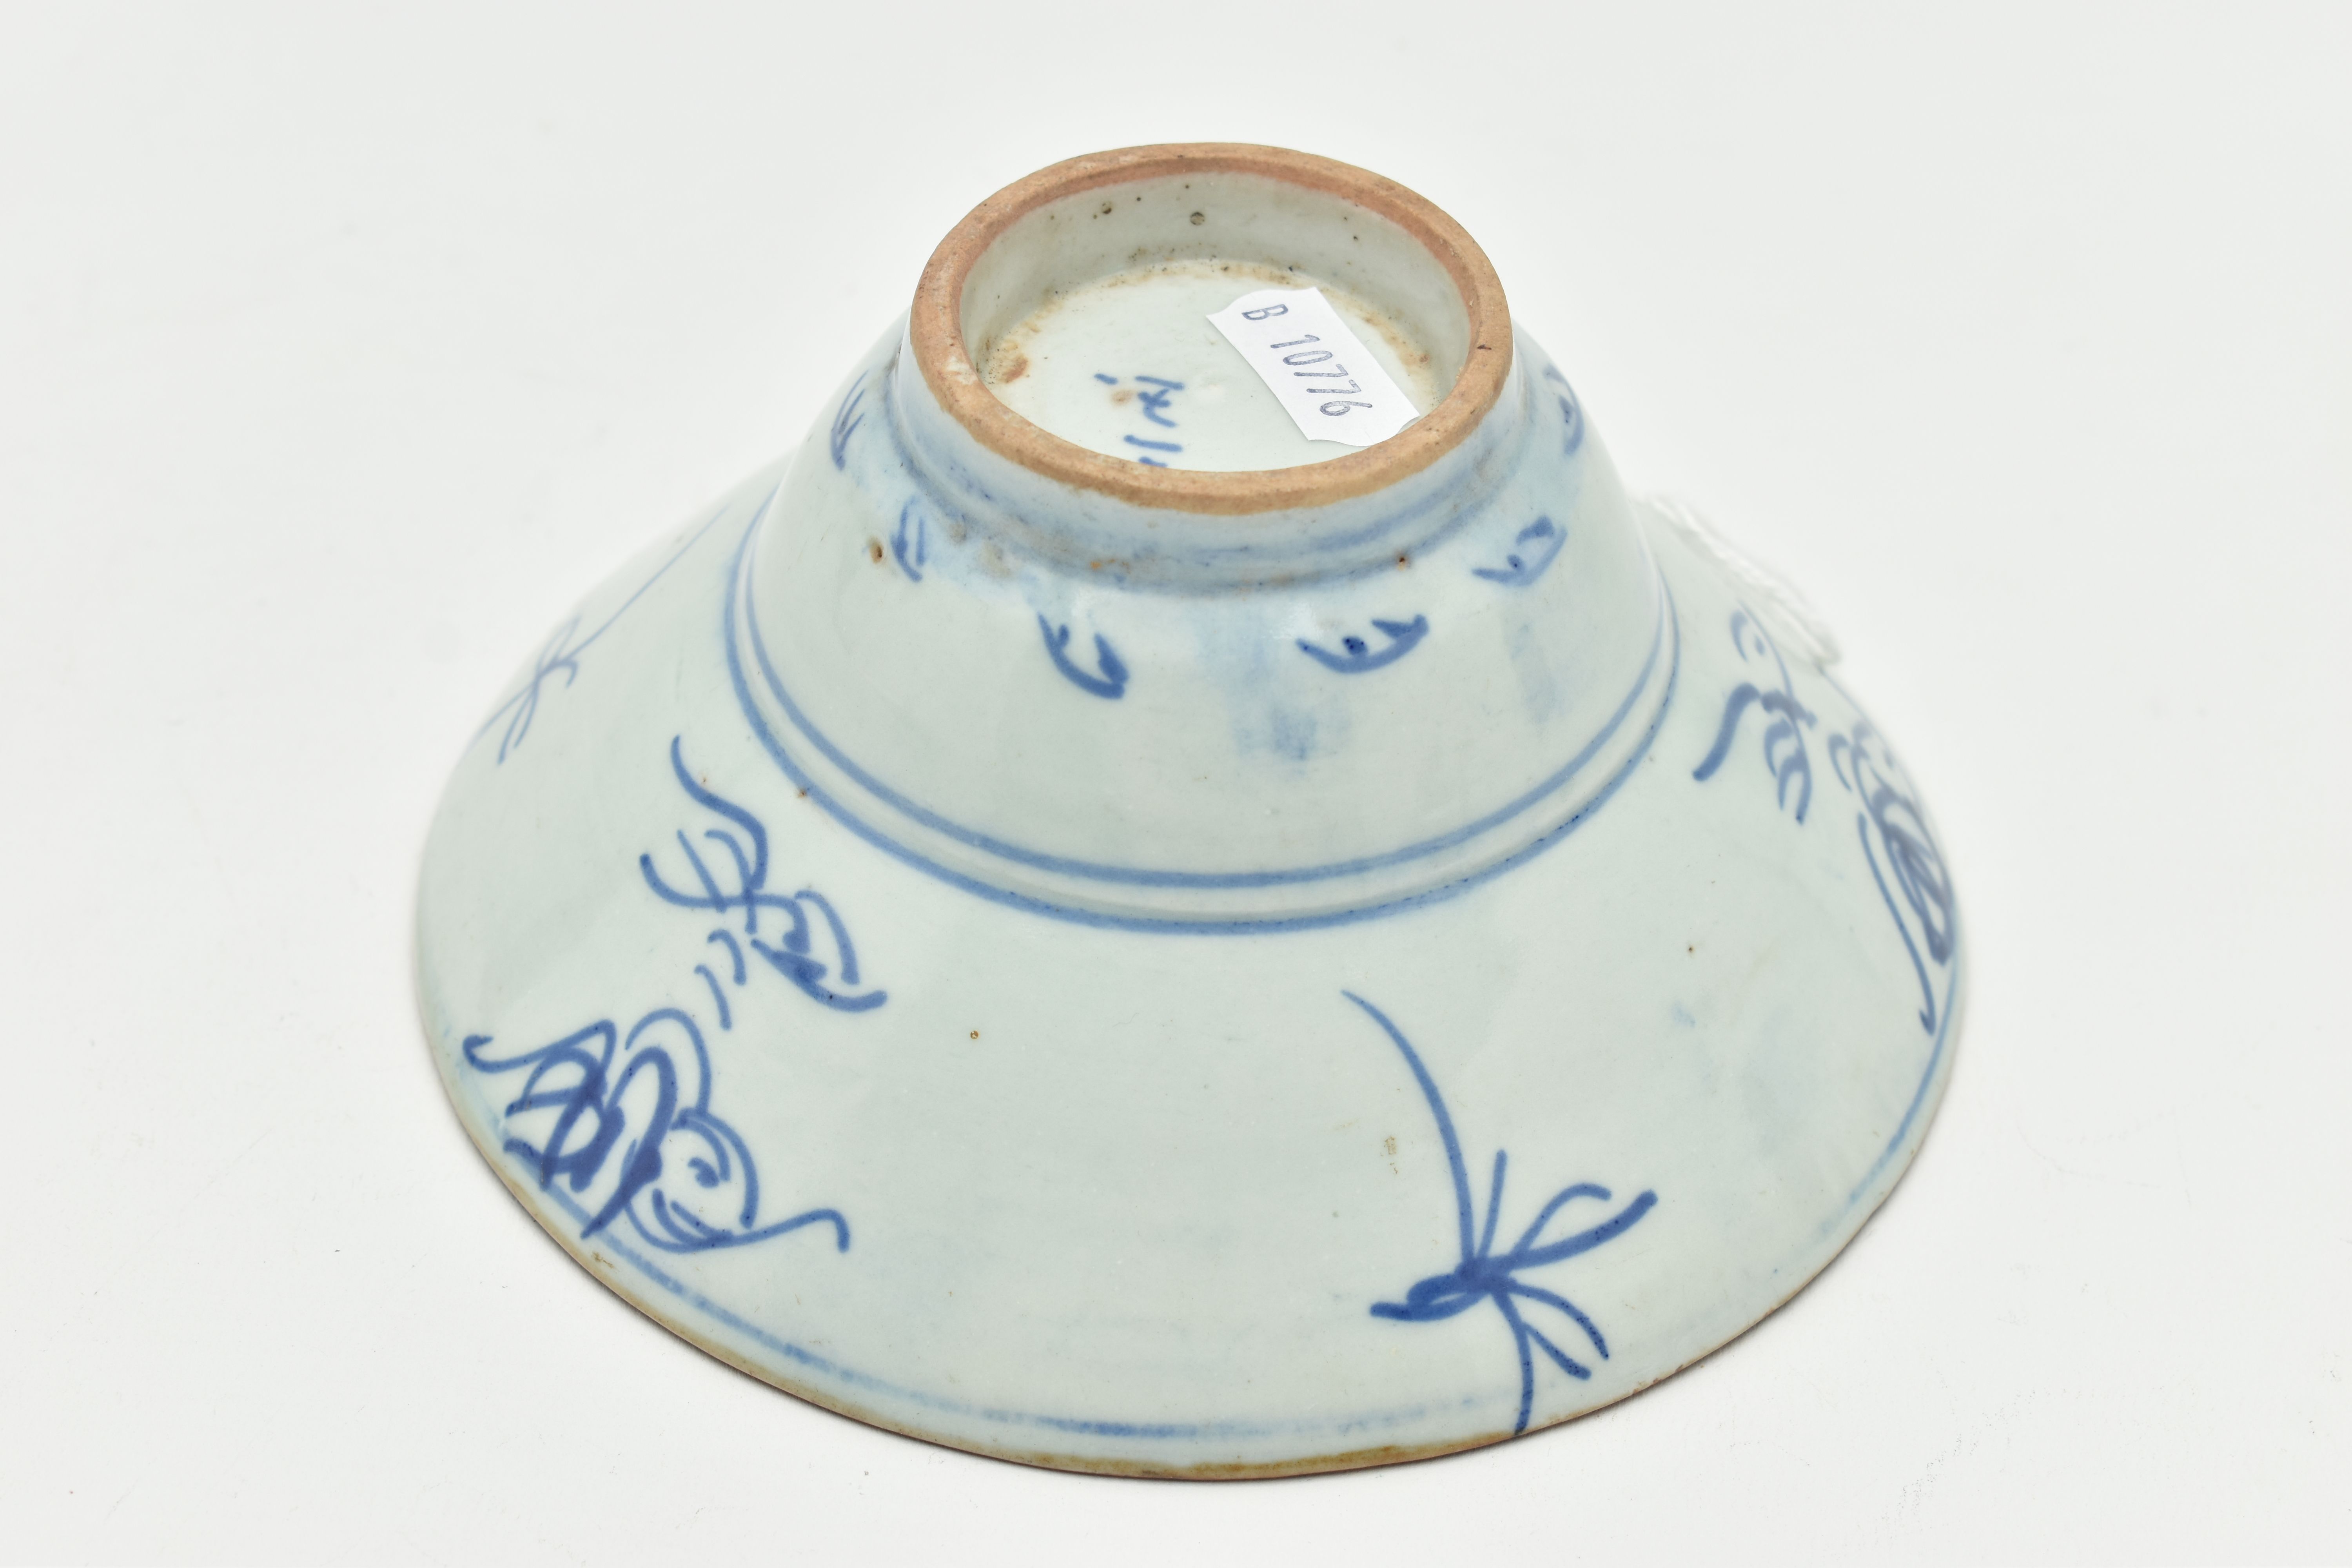 A LATE 18TH / EARLY 19TH CENTURY CHINESE PORCELAIN BLUE AND WHITE PORCELAIN TEK SING CARGO TYPE - Image 6 of 8